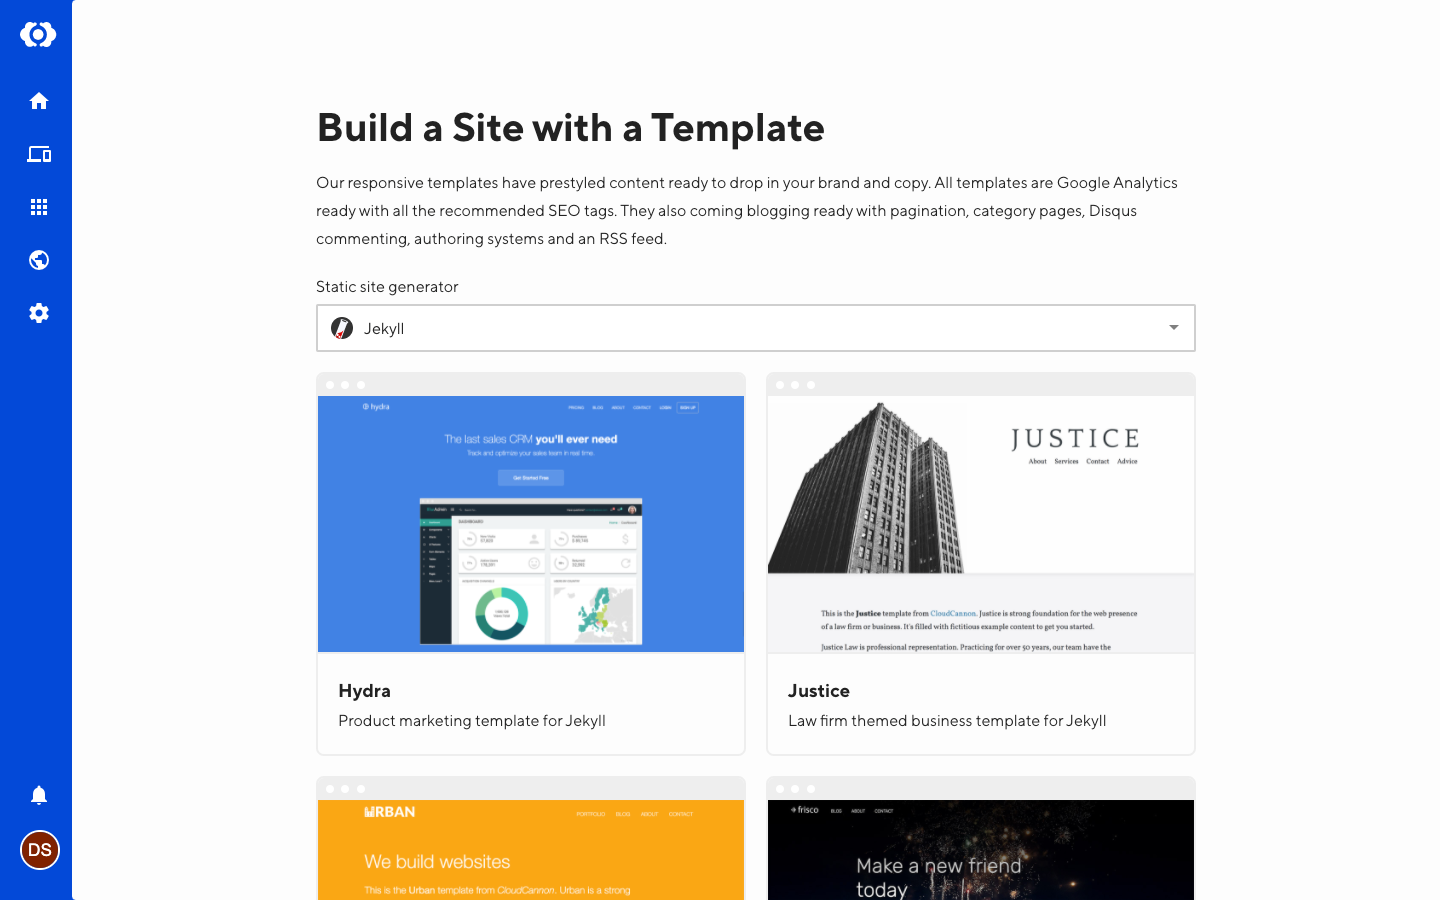 Building a site from one of our templates.